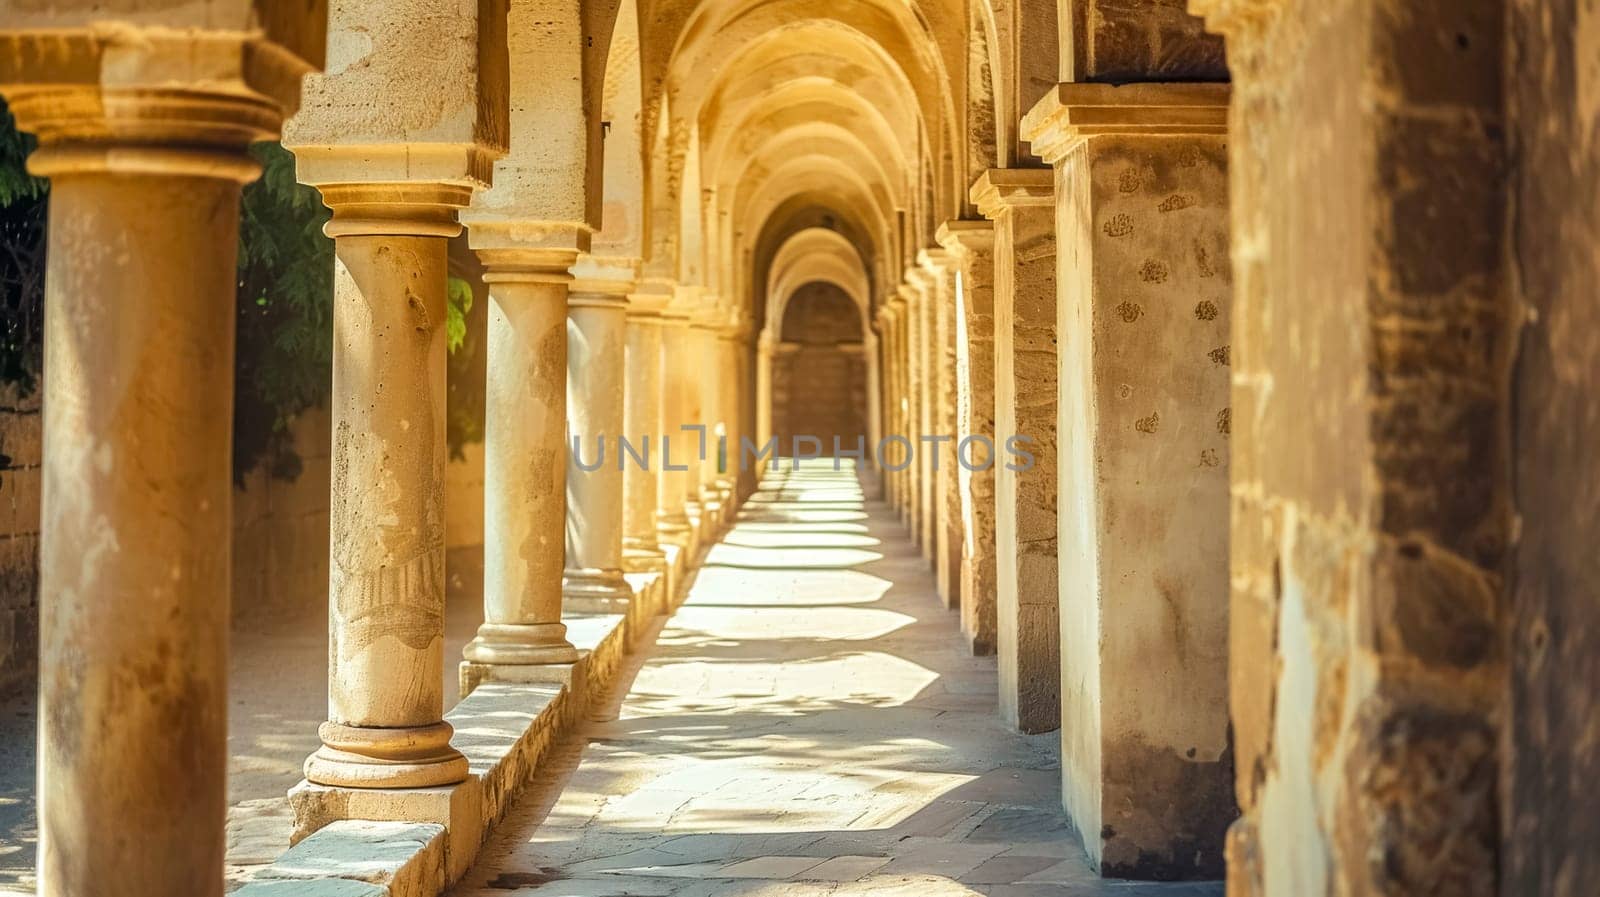 Sunlit historic corridor with arched ceilings by Edophoto